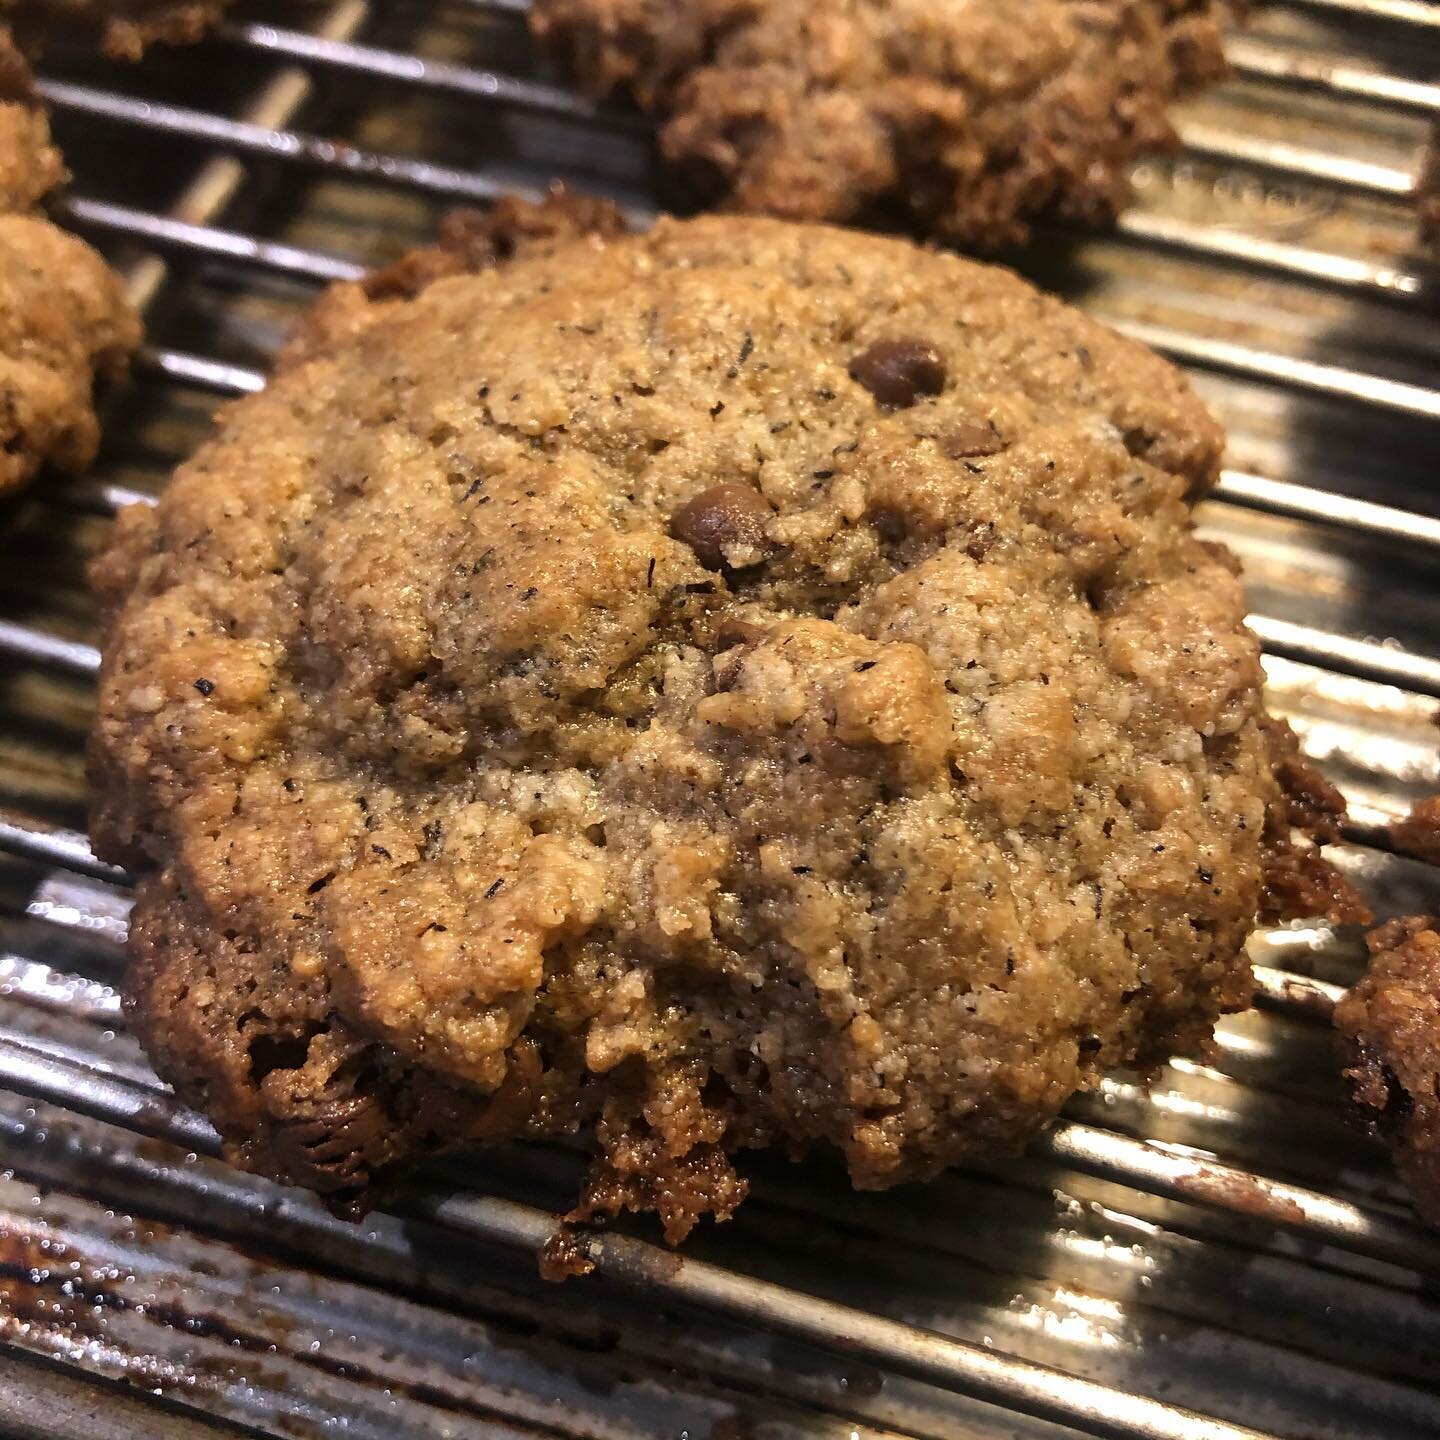 Can&rsquo;t resist @cloud9glutenfree chocolate chip cookies #vegan #kosher #dairyfree #wellness #rythmicdiet @craftsight #eatingwellness #curatingwellness #furtheringwellness #enablingchoice
..
..
What&rsquo;s your favourite gluten-free indulgence ?